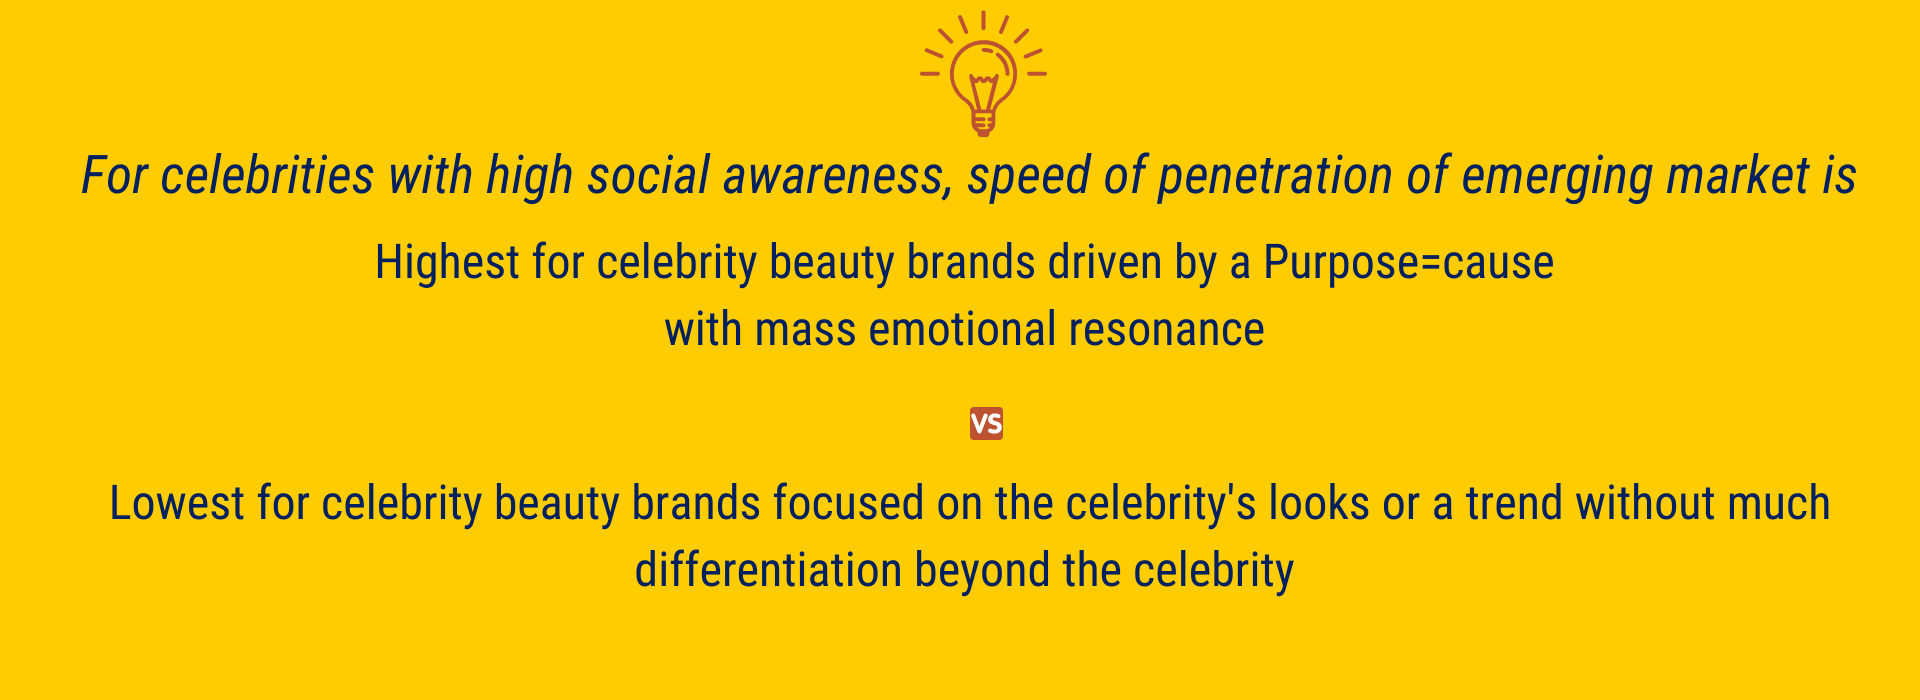 Celebrity Beauty Brand Strategy Summary for Speed of Penetration